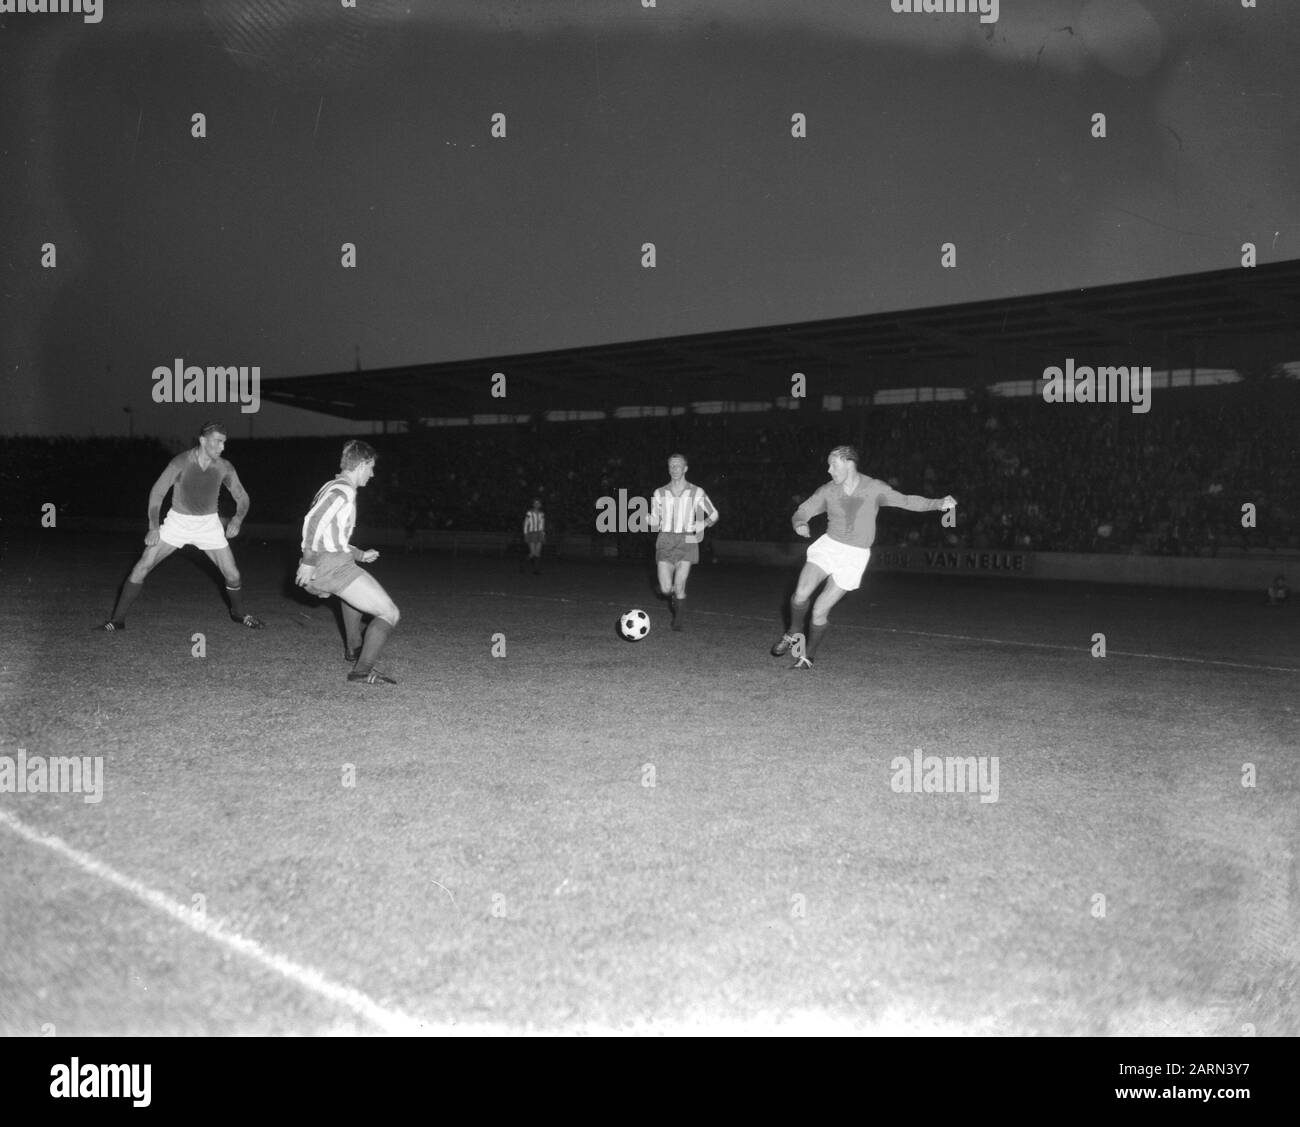 Preliminary Dutch team against Young Orange, Game Moment Date: May 12, 1964 Keywords: national football, sport Person name: Young Orange Stock Photo